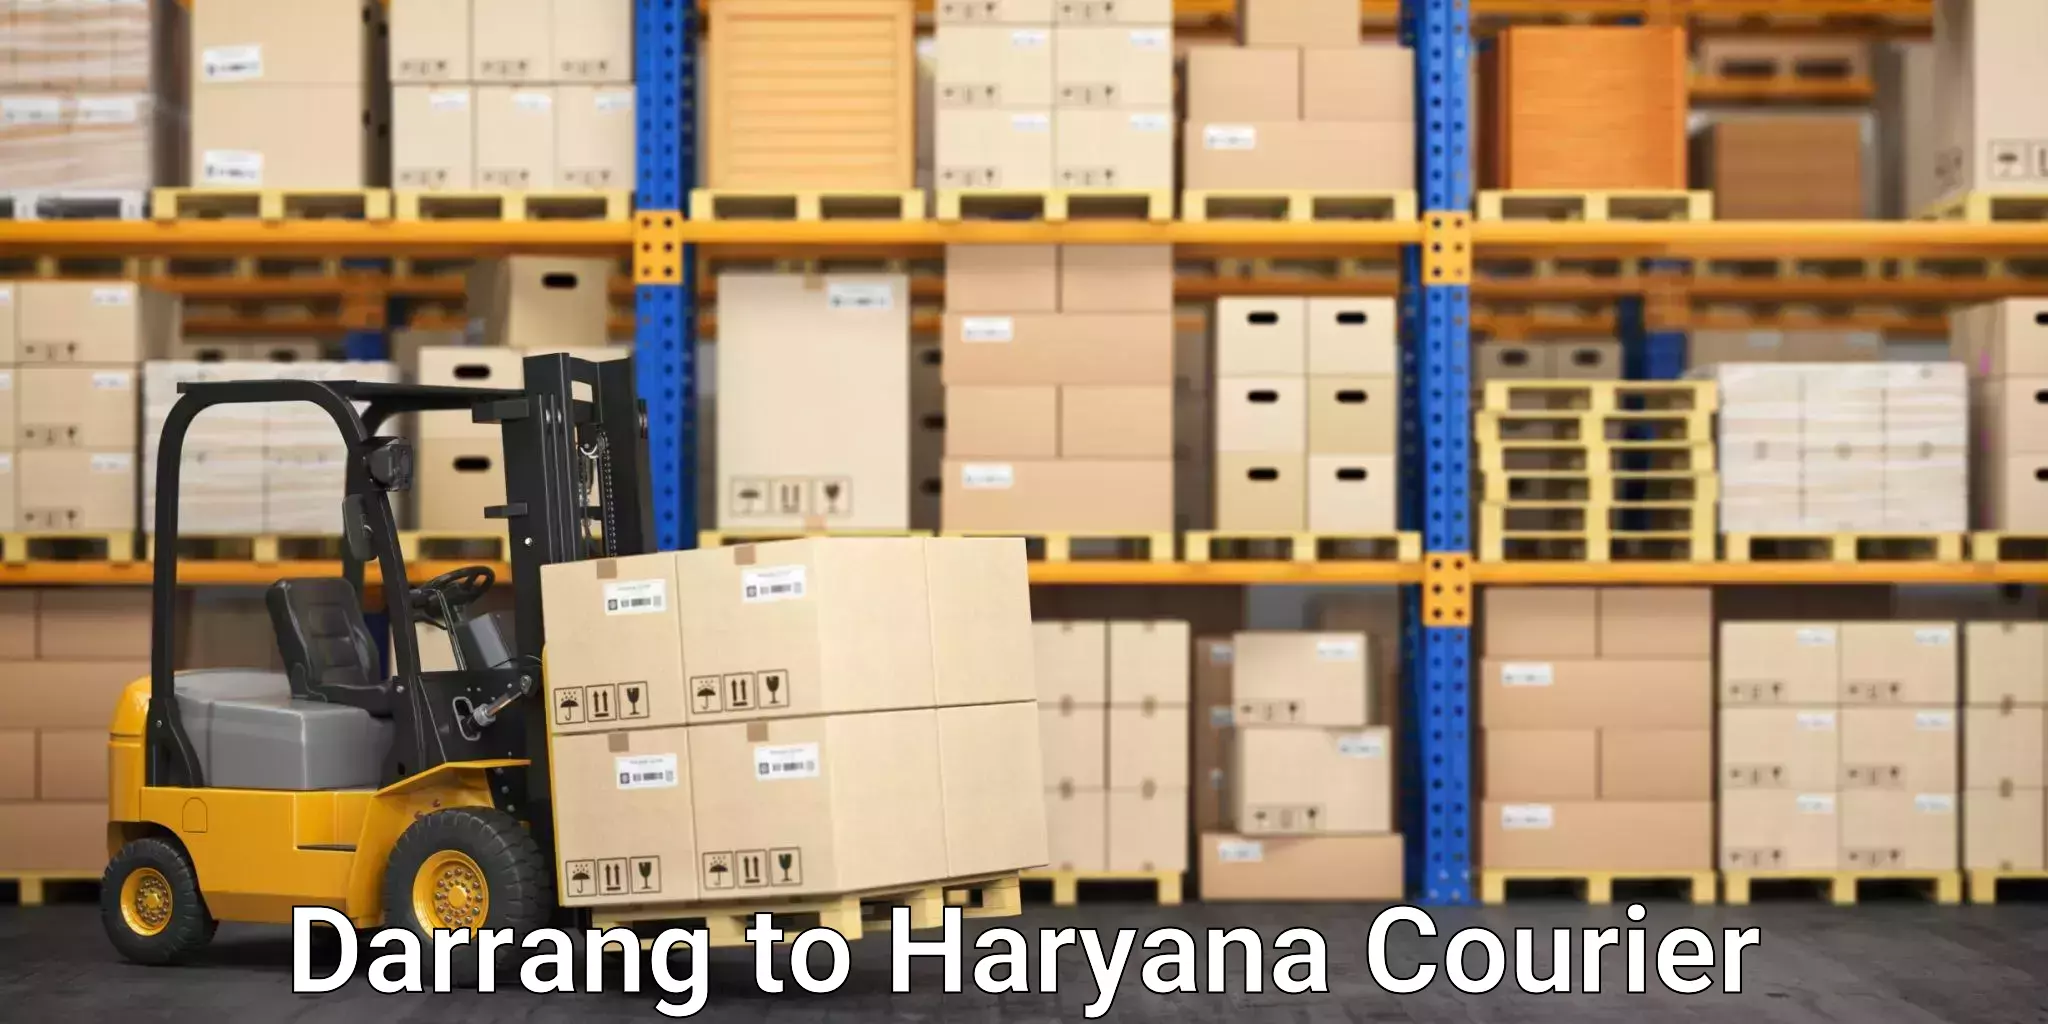 Quality courier services Darrang to Chaudhary Charan Singh Haryana Agricultural University Hisar